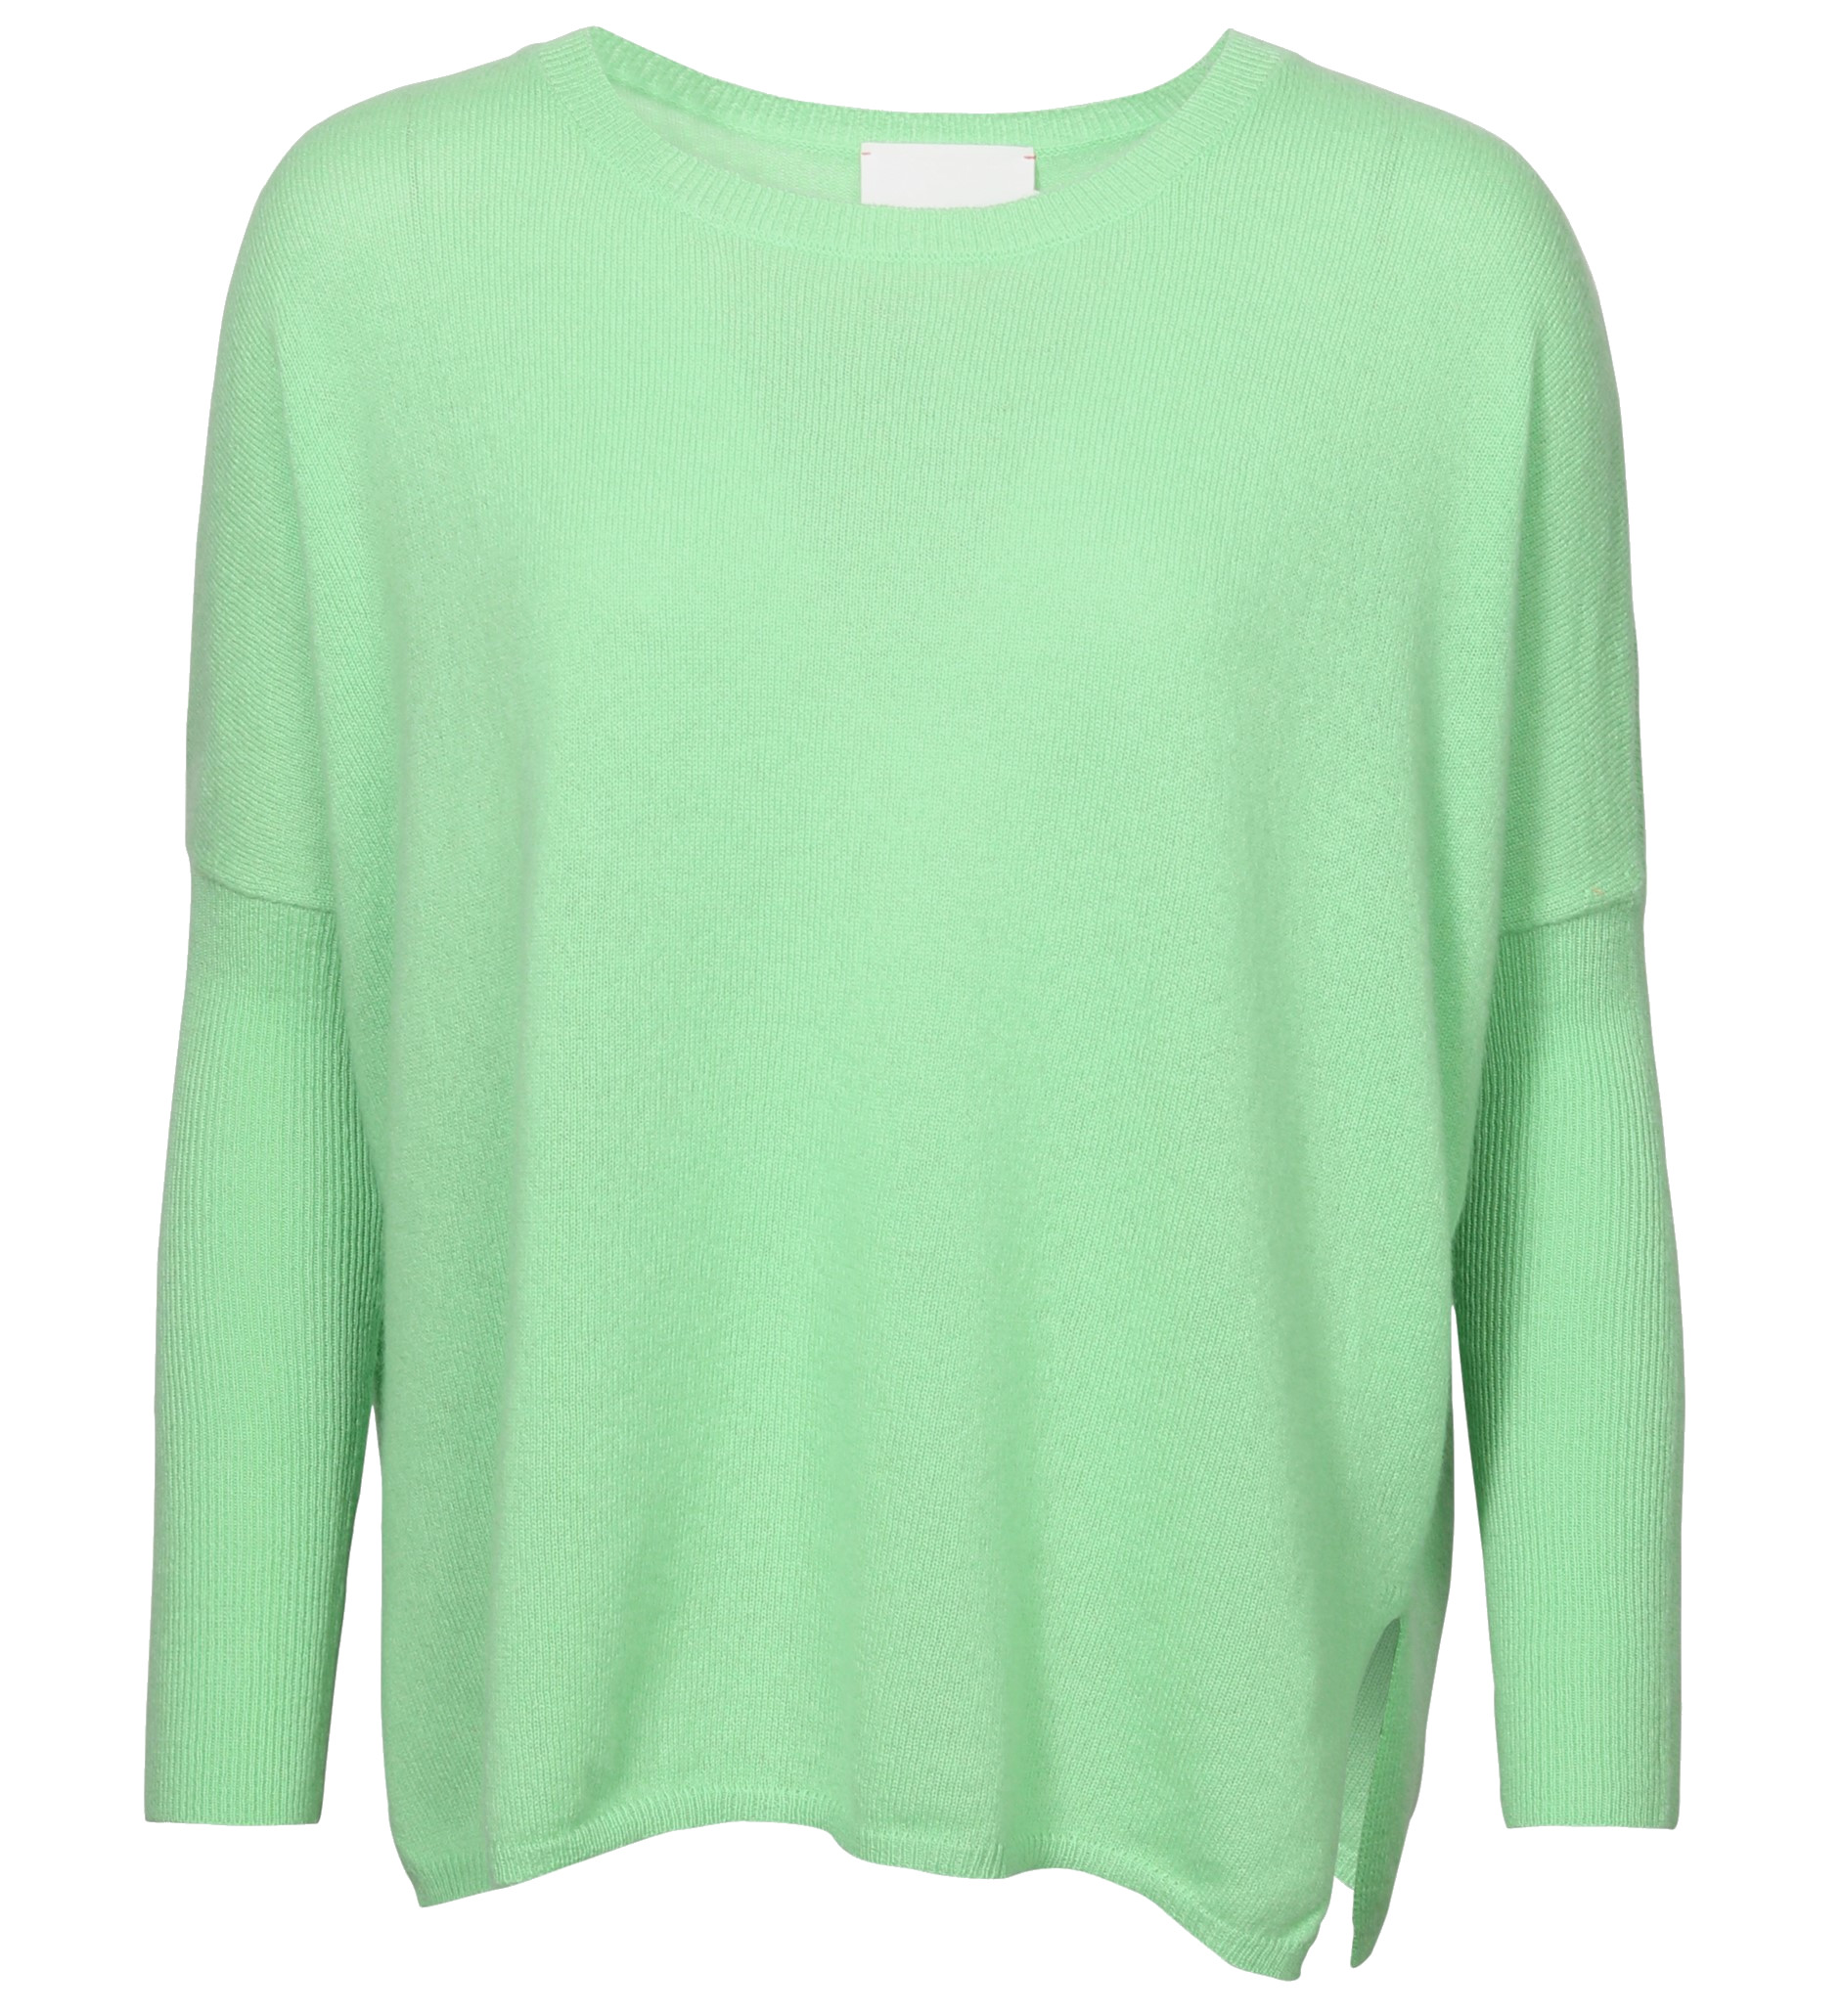 ABSOLUT CASHMERE Poncho Sweater Astrid in Light Green L